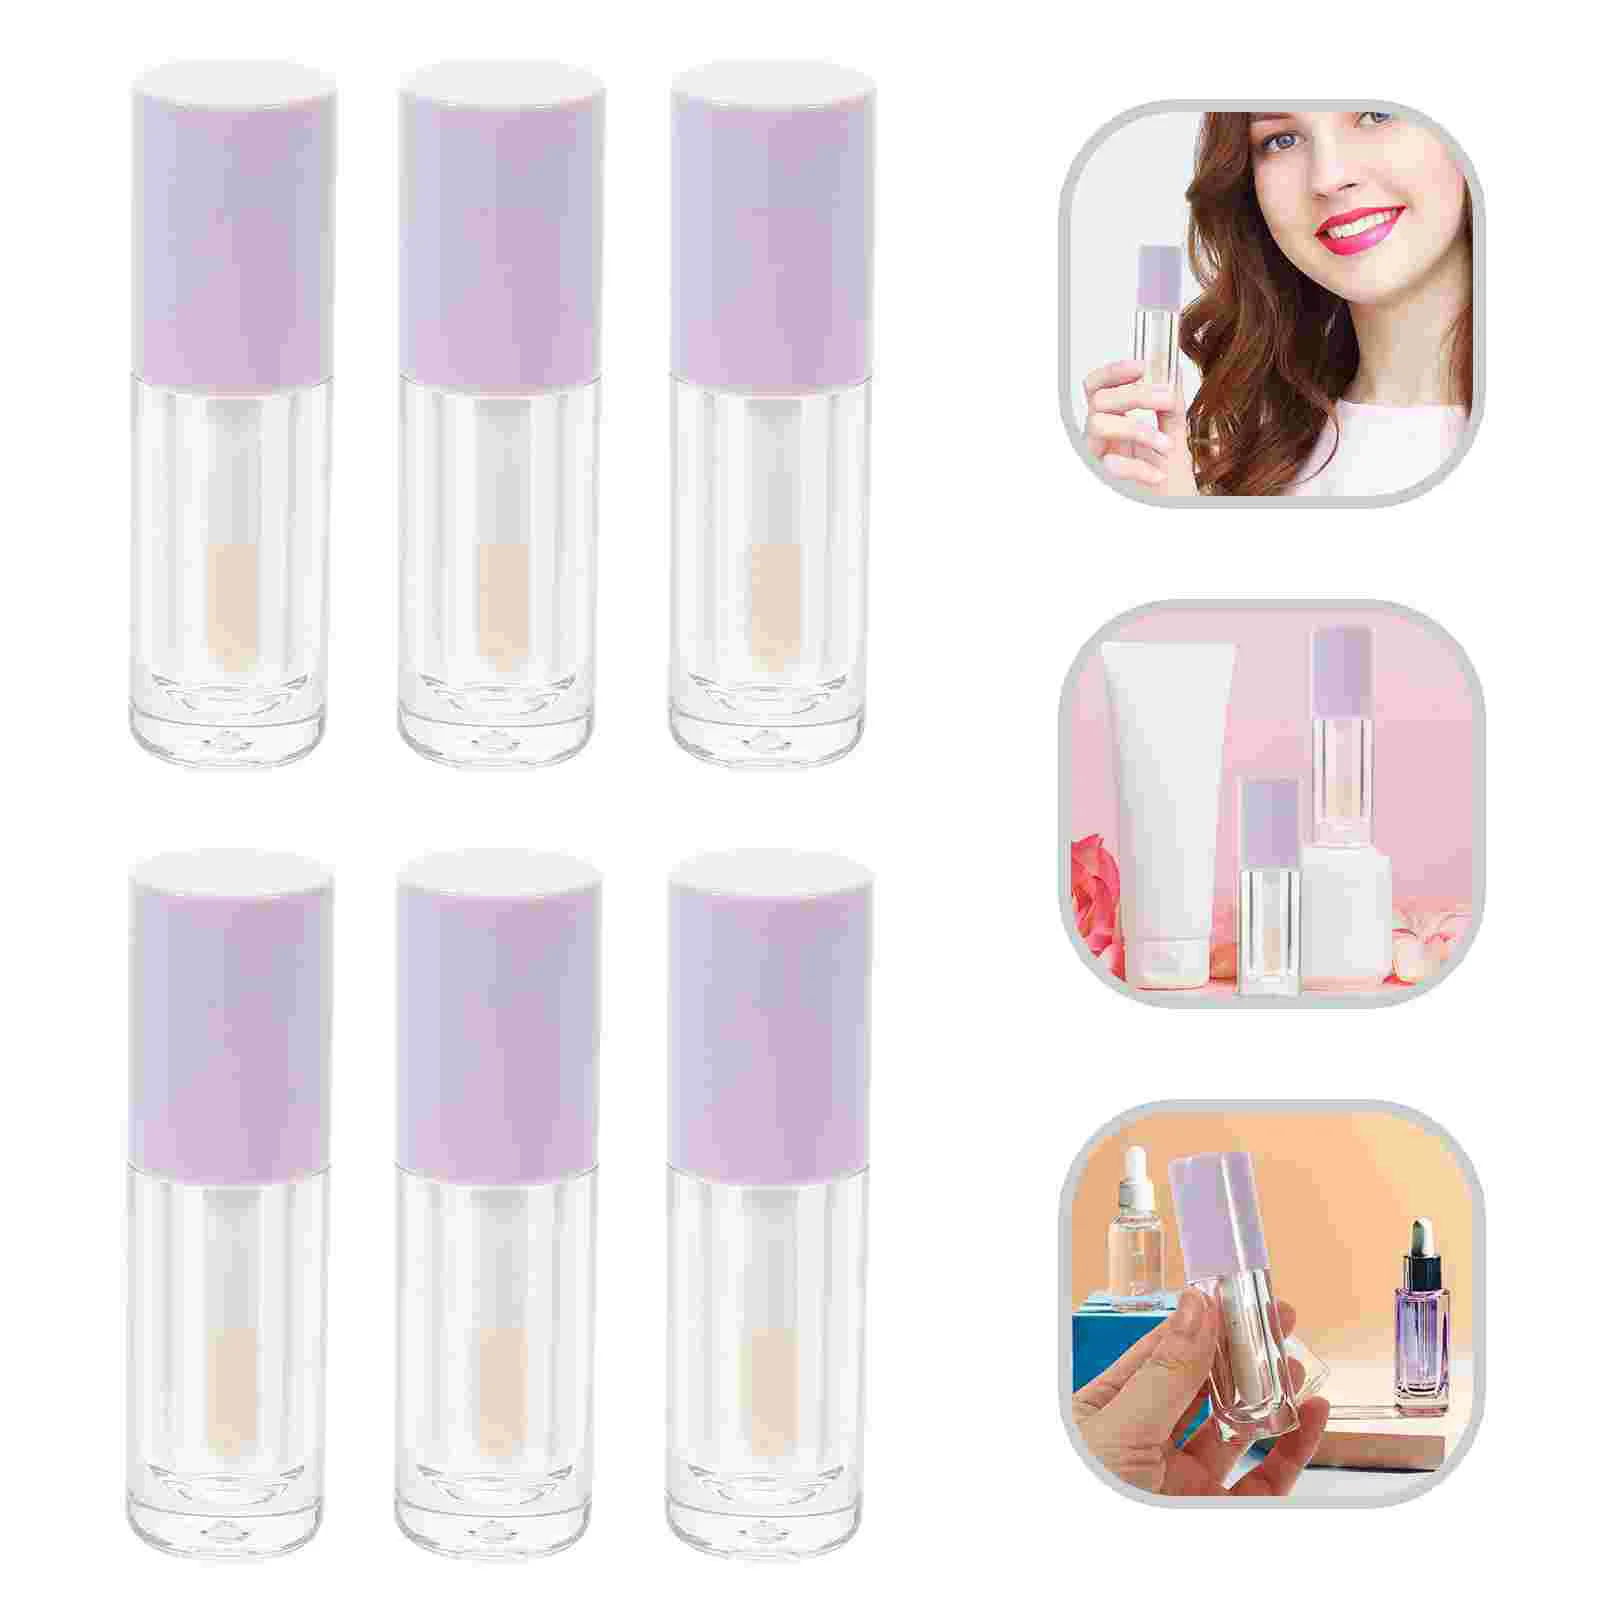 

14 Pcs Clear Lip Gloss Tube Wand Balm Tubes Empty Containers Stick Abs Refillable